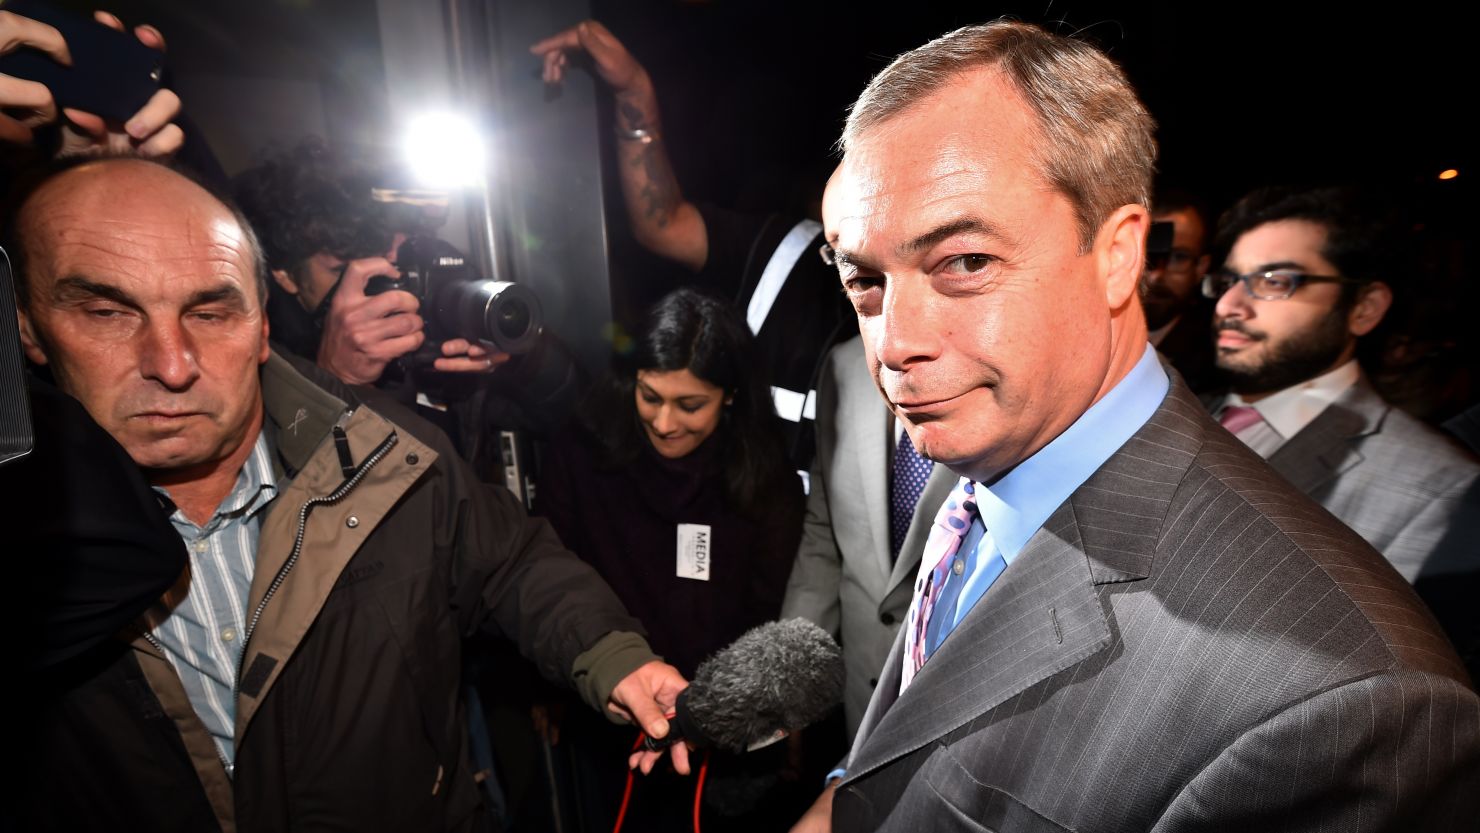 UKIP's Nigel Farage will be reveling in his party's triumph and redoubling efforts to win over Euroskeptic Tories.